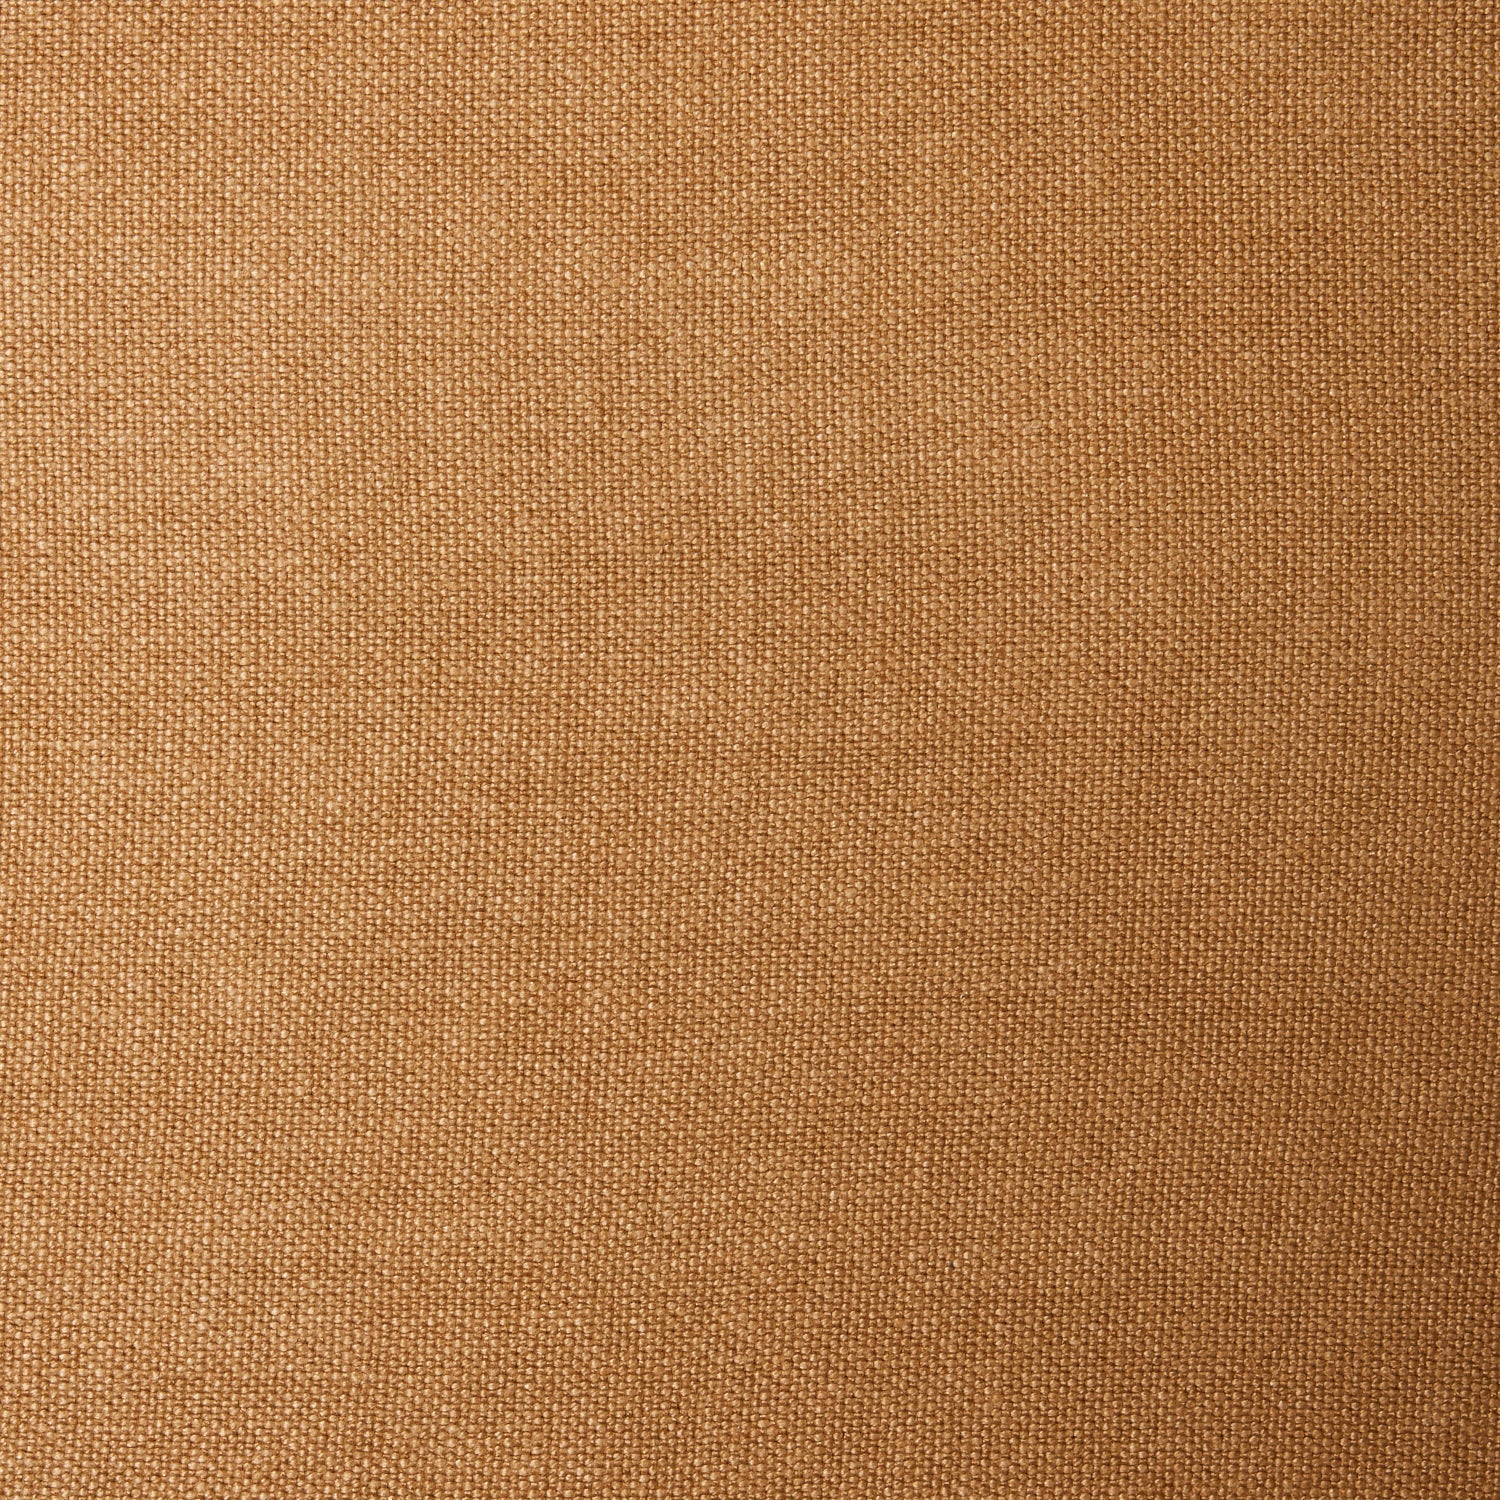 A swatch of old-world linen fabric in a solid tan color.